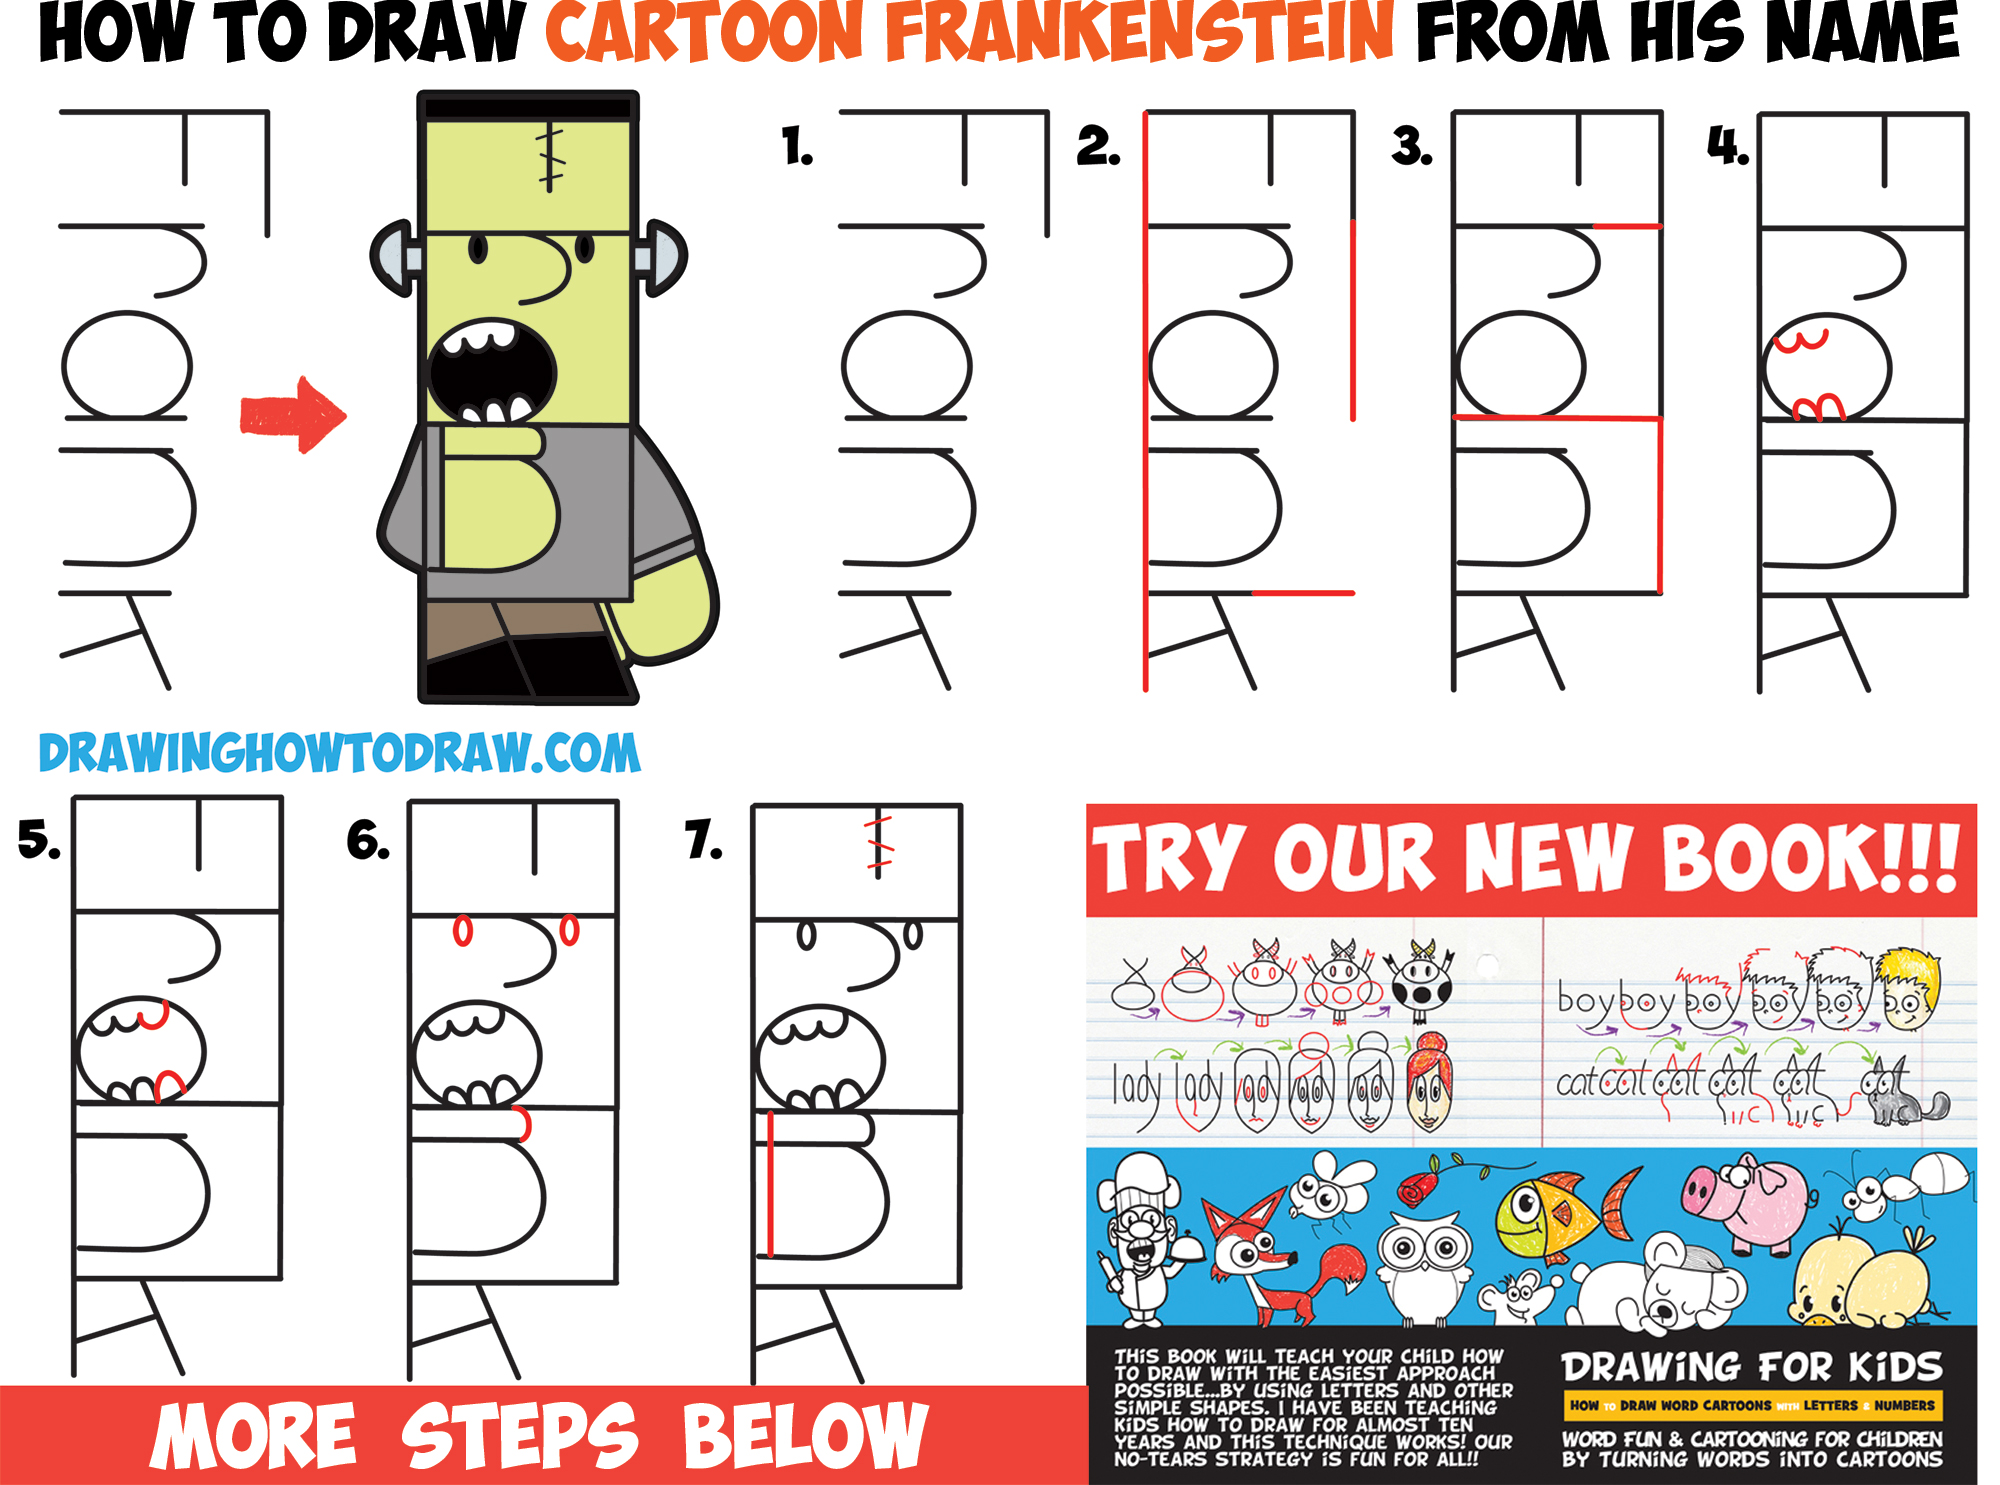 How to Draw Cartoon Frankenstein's Monster from "Frank" Word Cartoons Easy Step by Step Drawing Tutorial for Kids